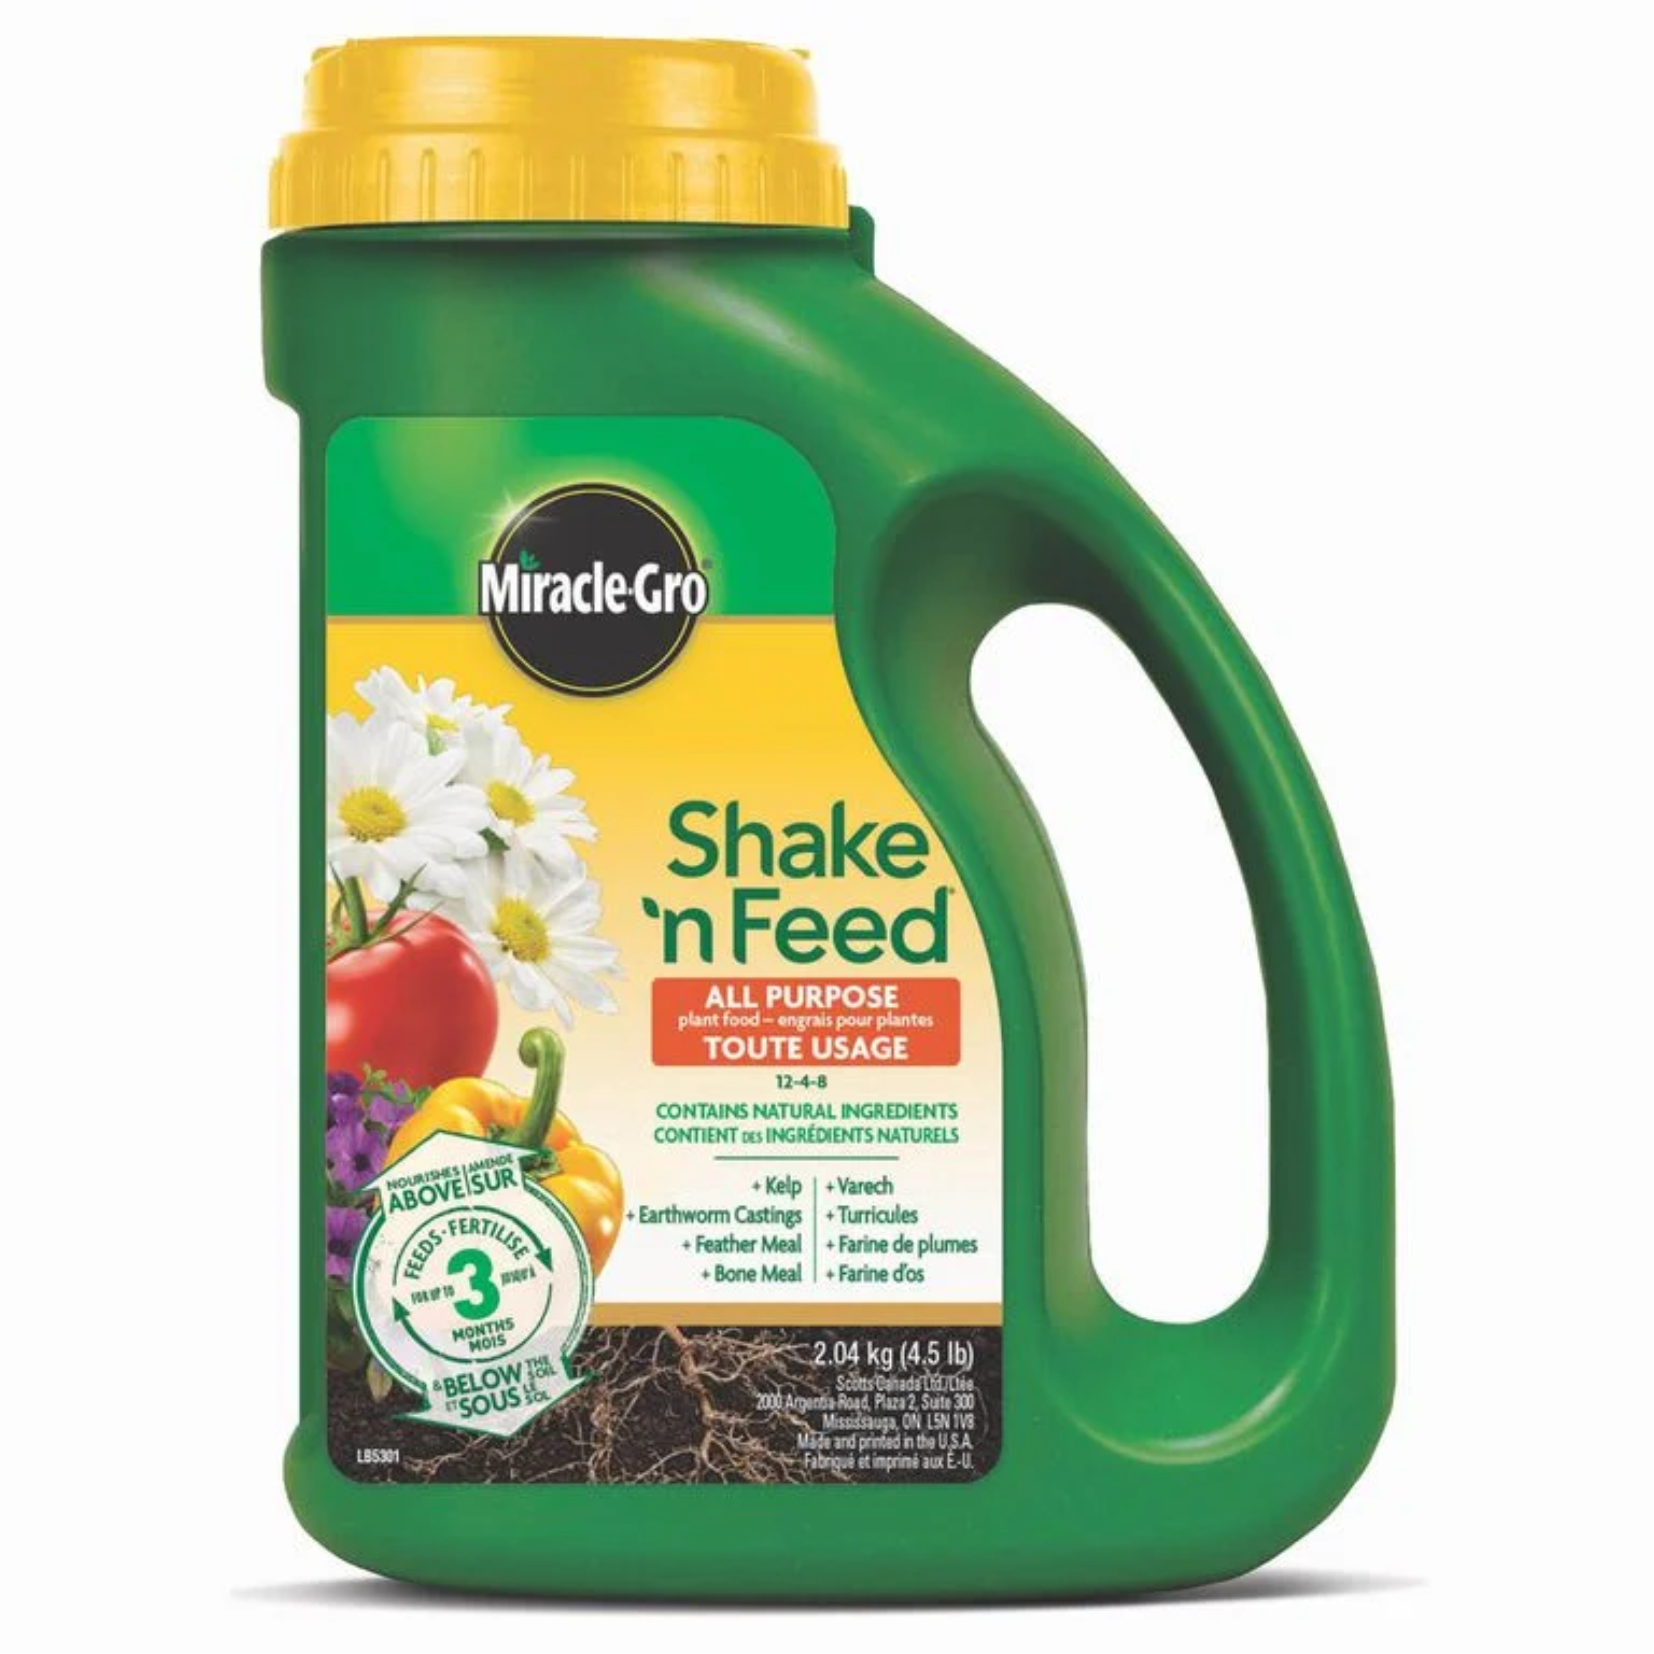 Miracle Grow Shake 'n Feed All Purpose Plant Feed 8lb